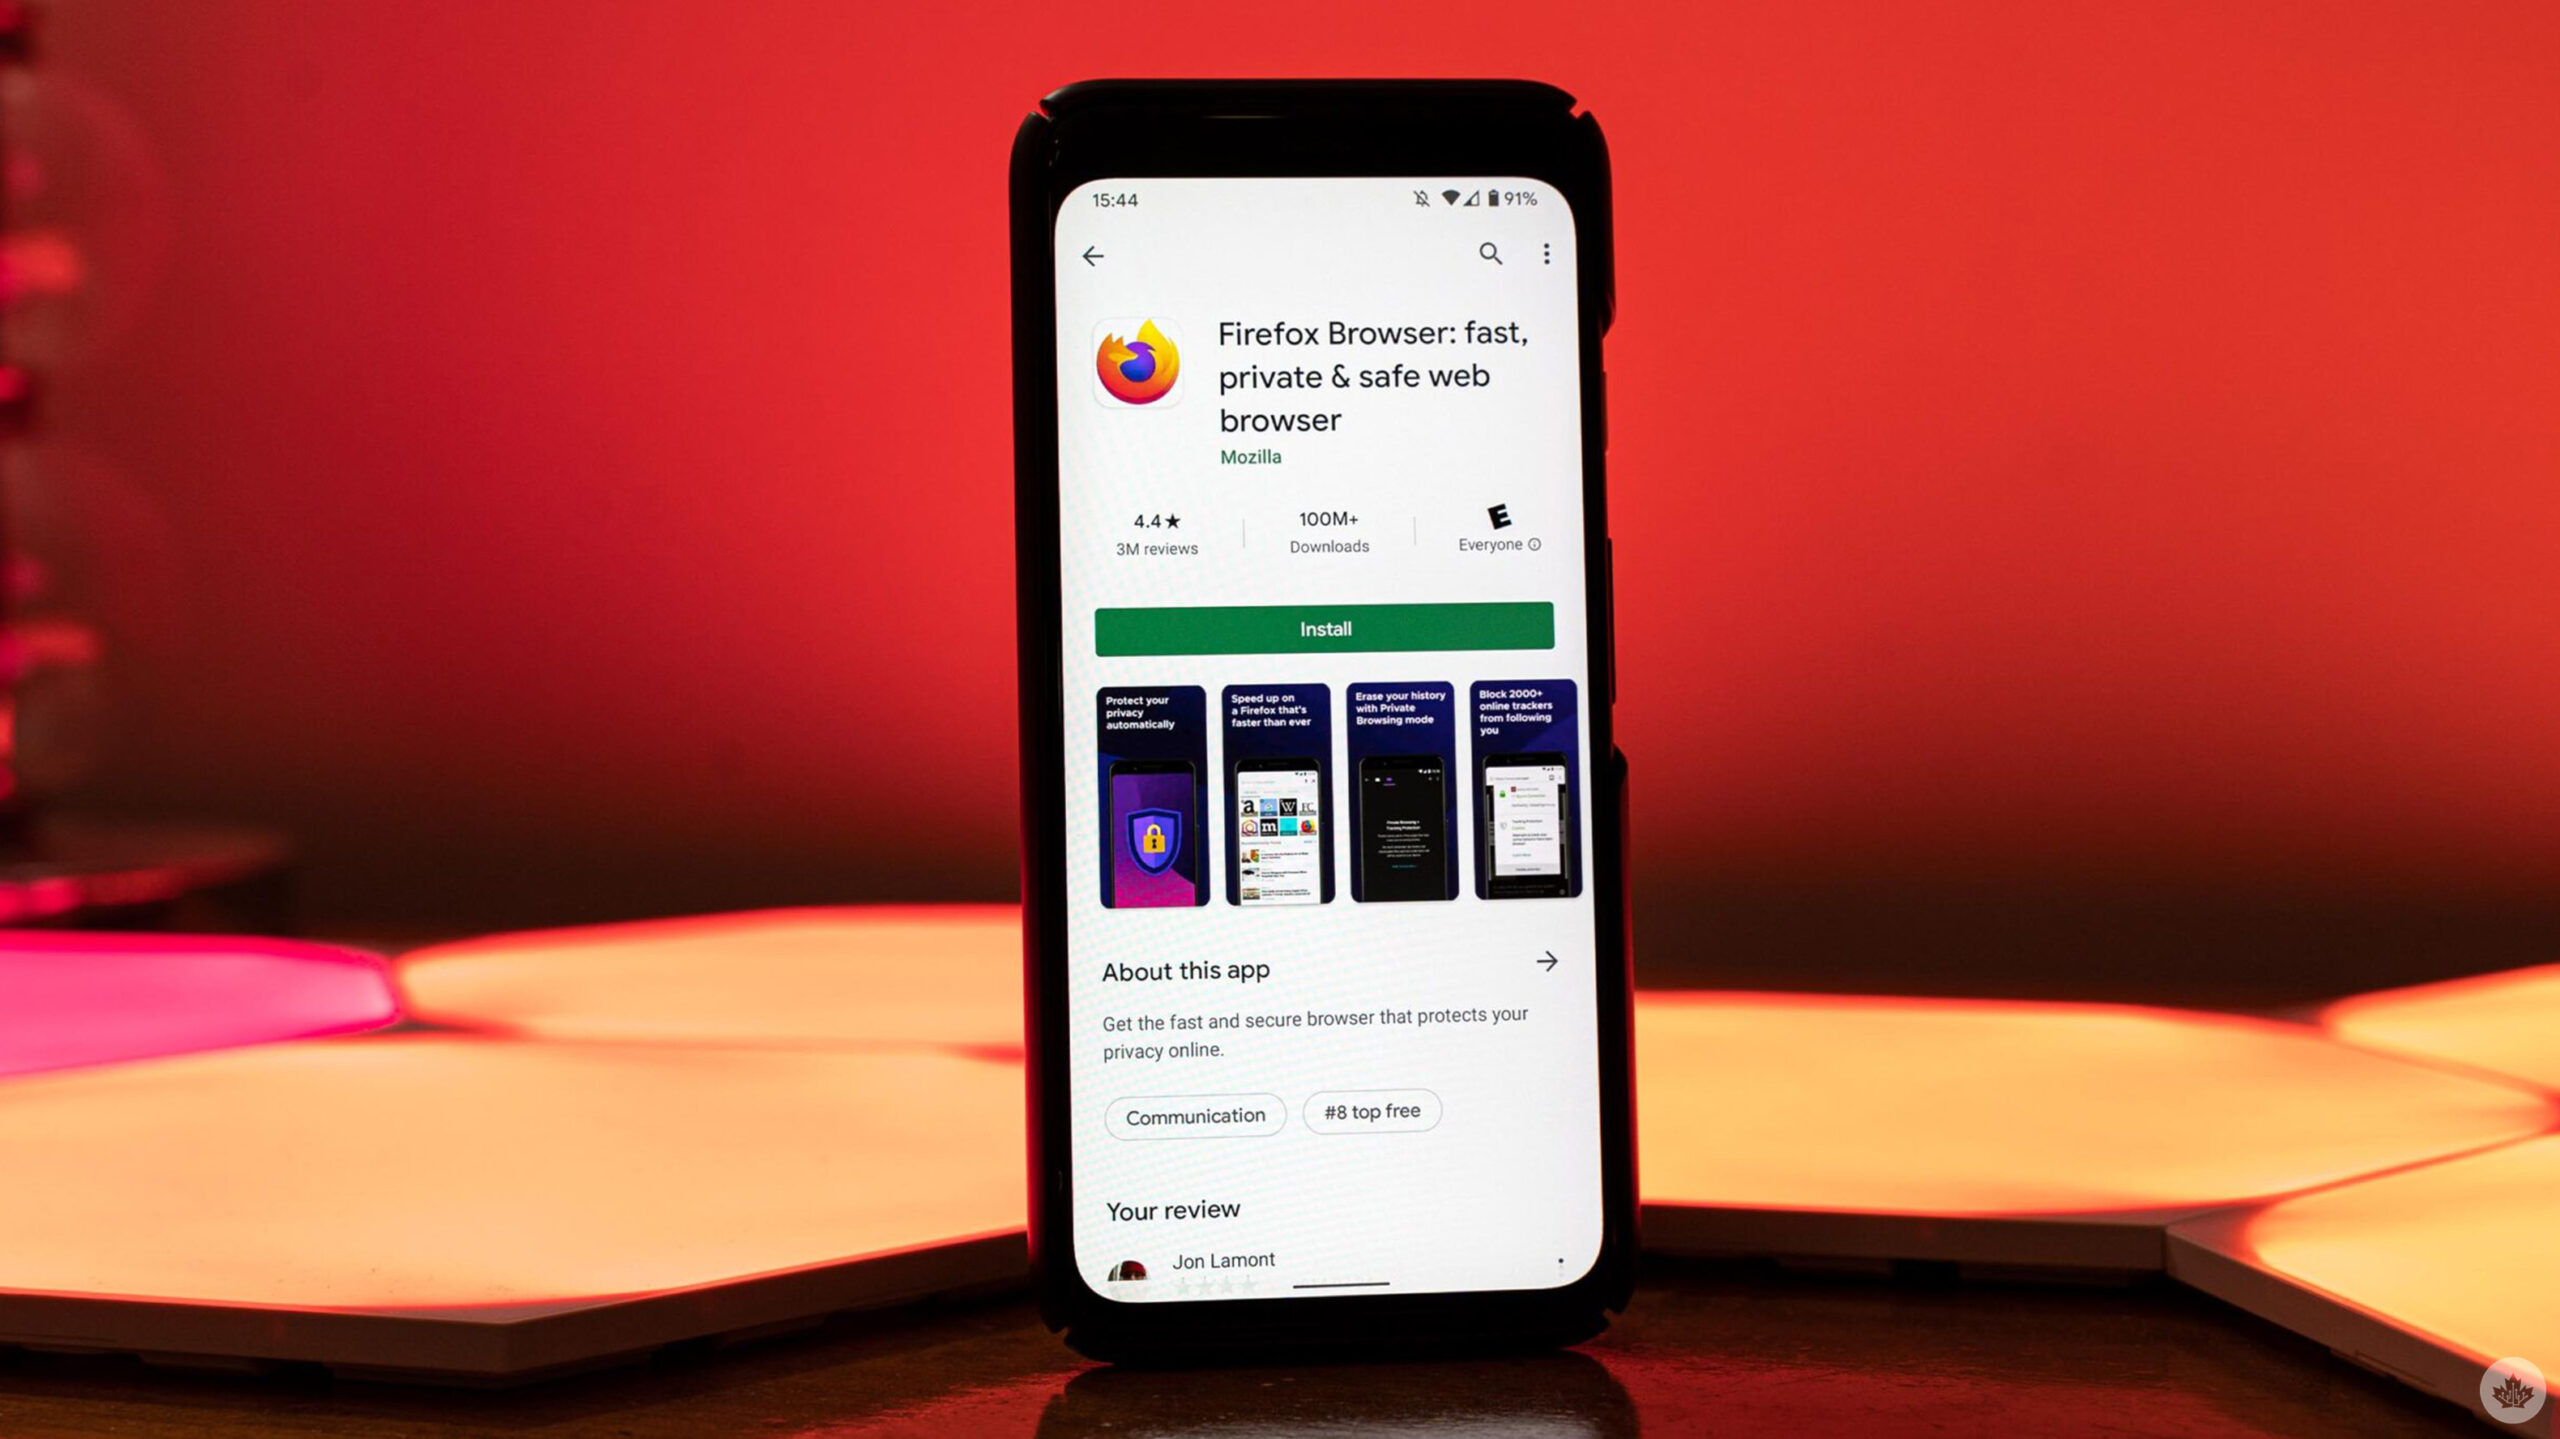 8 Firefox pro tips and tricks for Android and iOS (plus a few more)